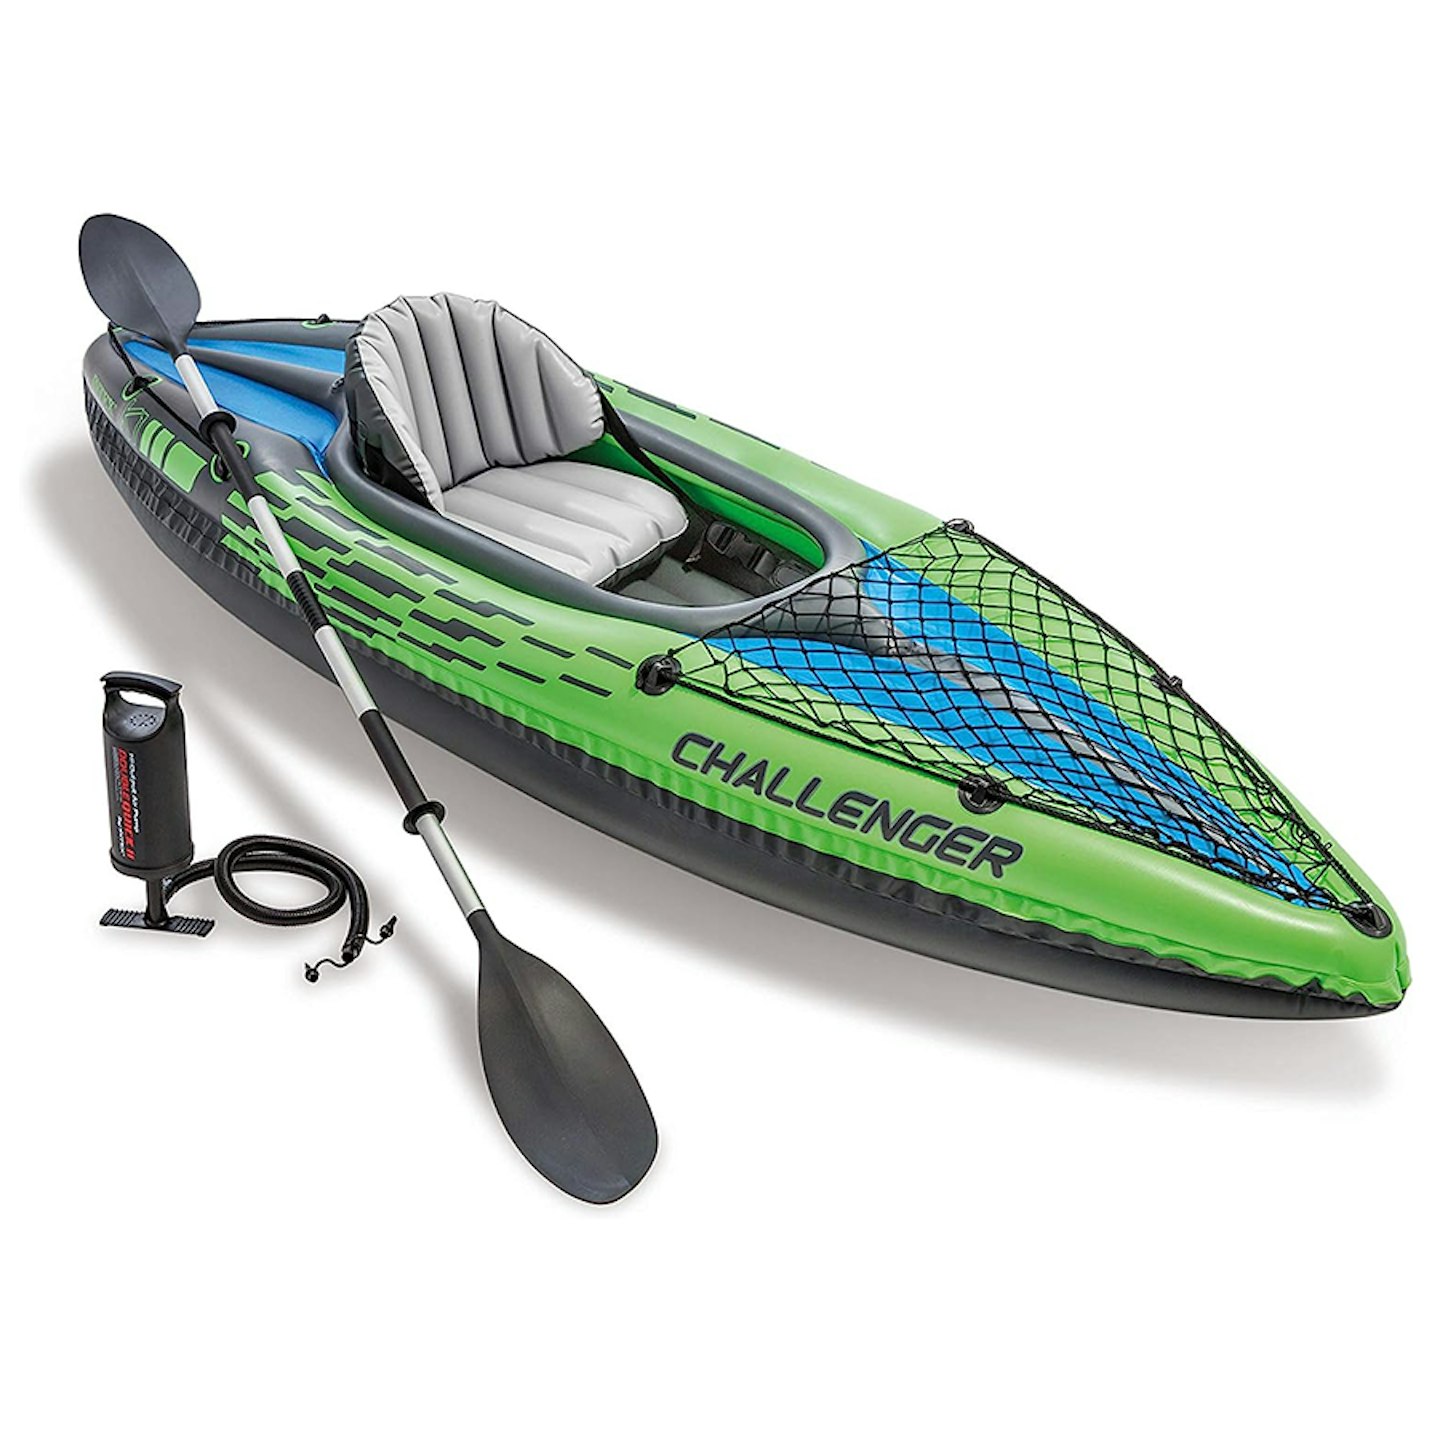 Intex Challenger one-person inflatable Kayak